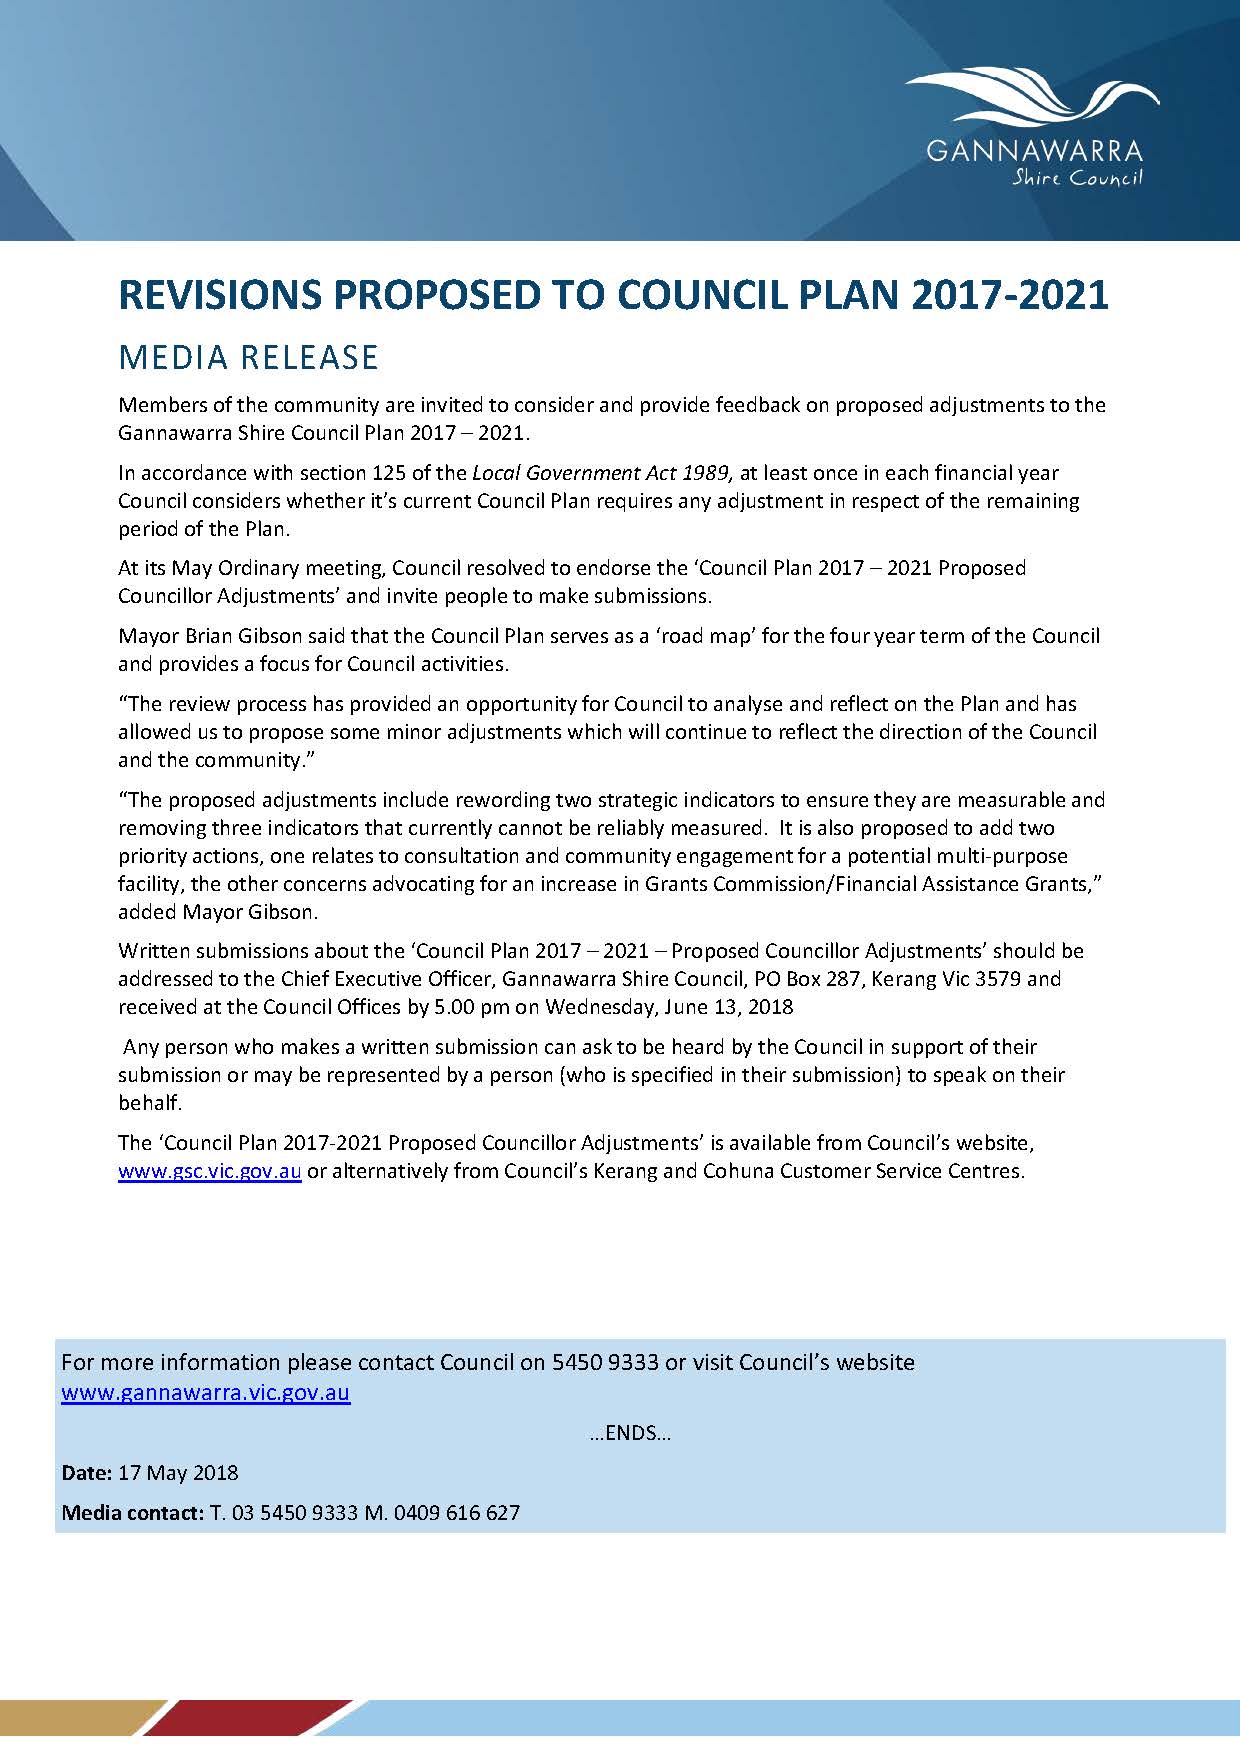 MR_Revisions Proposed to Council Plan 2017-2021.jpg